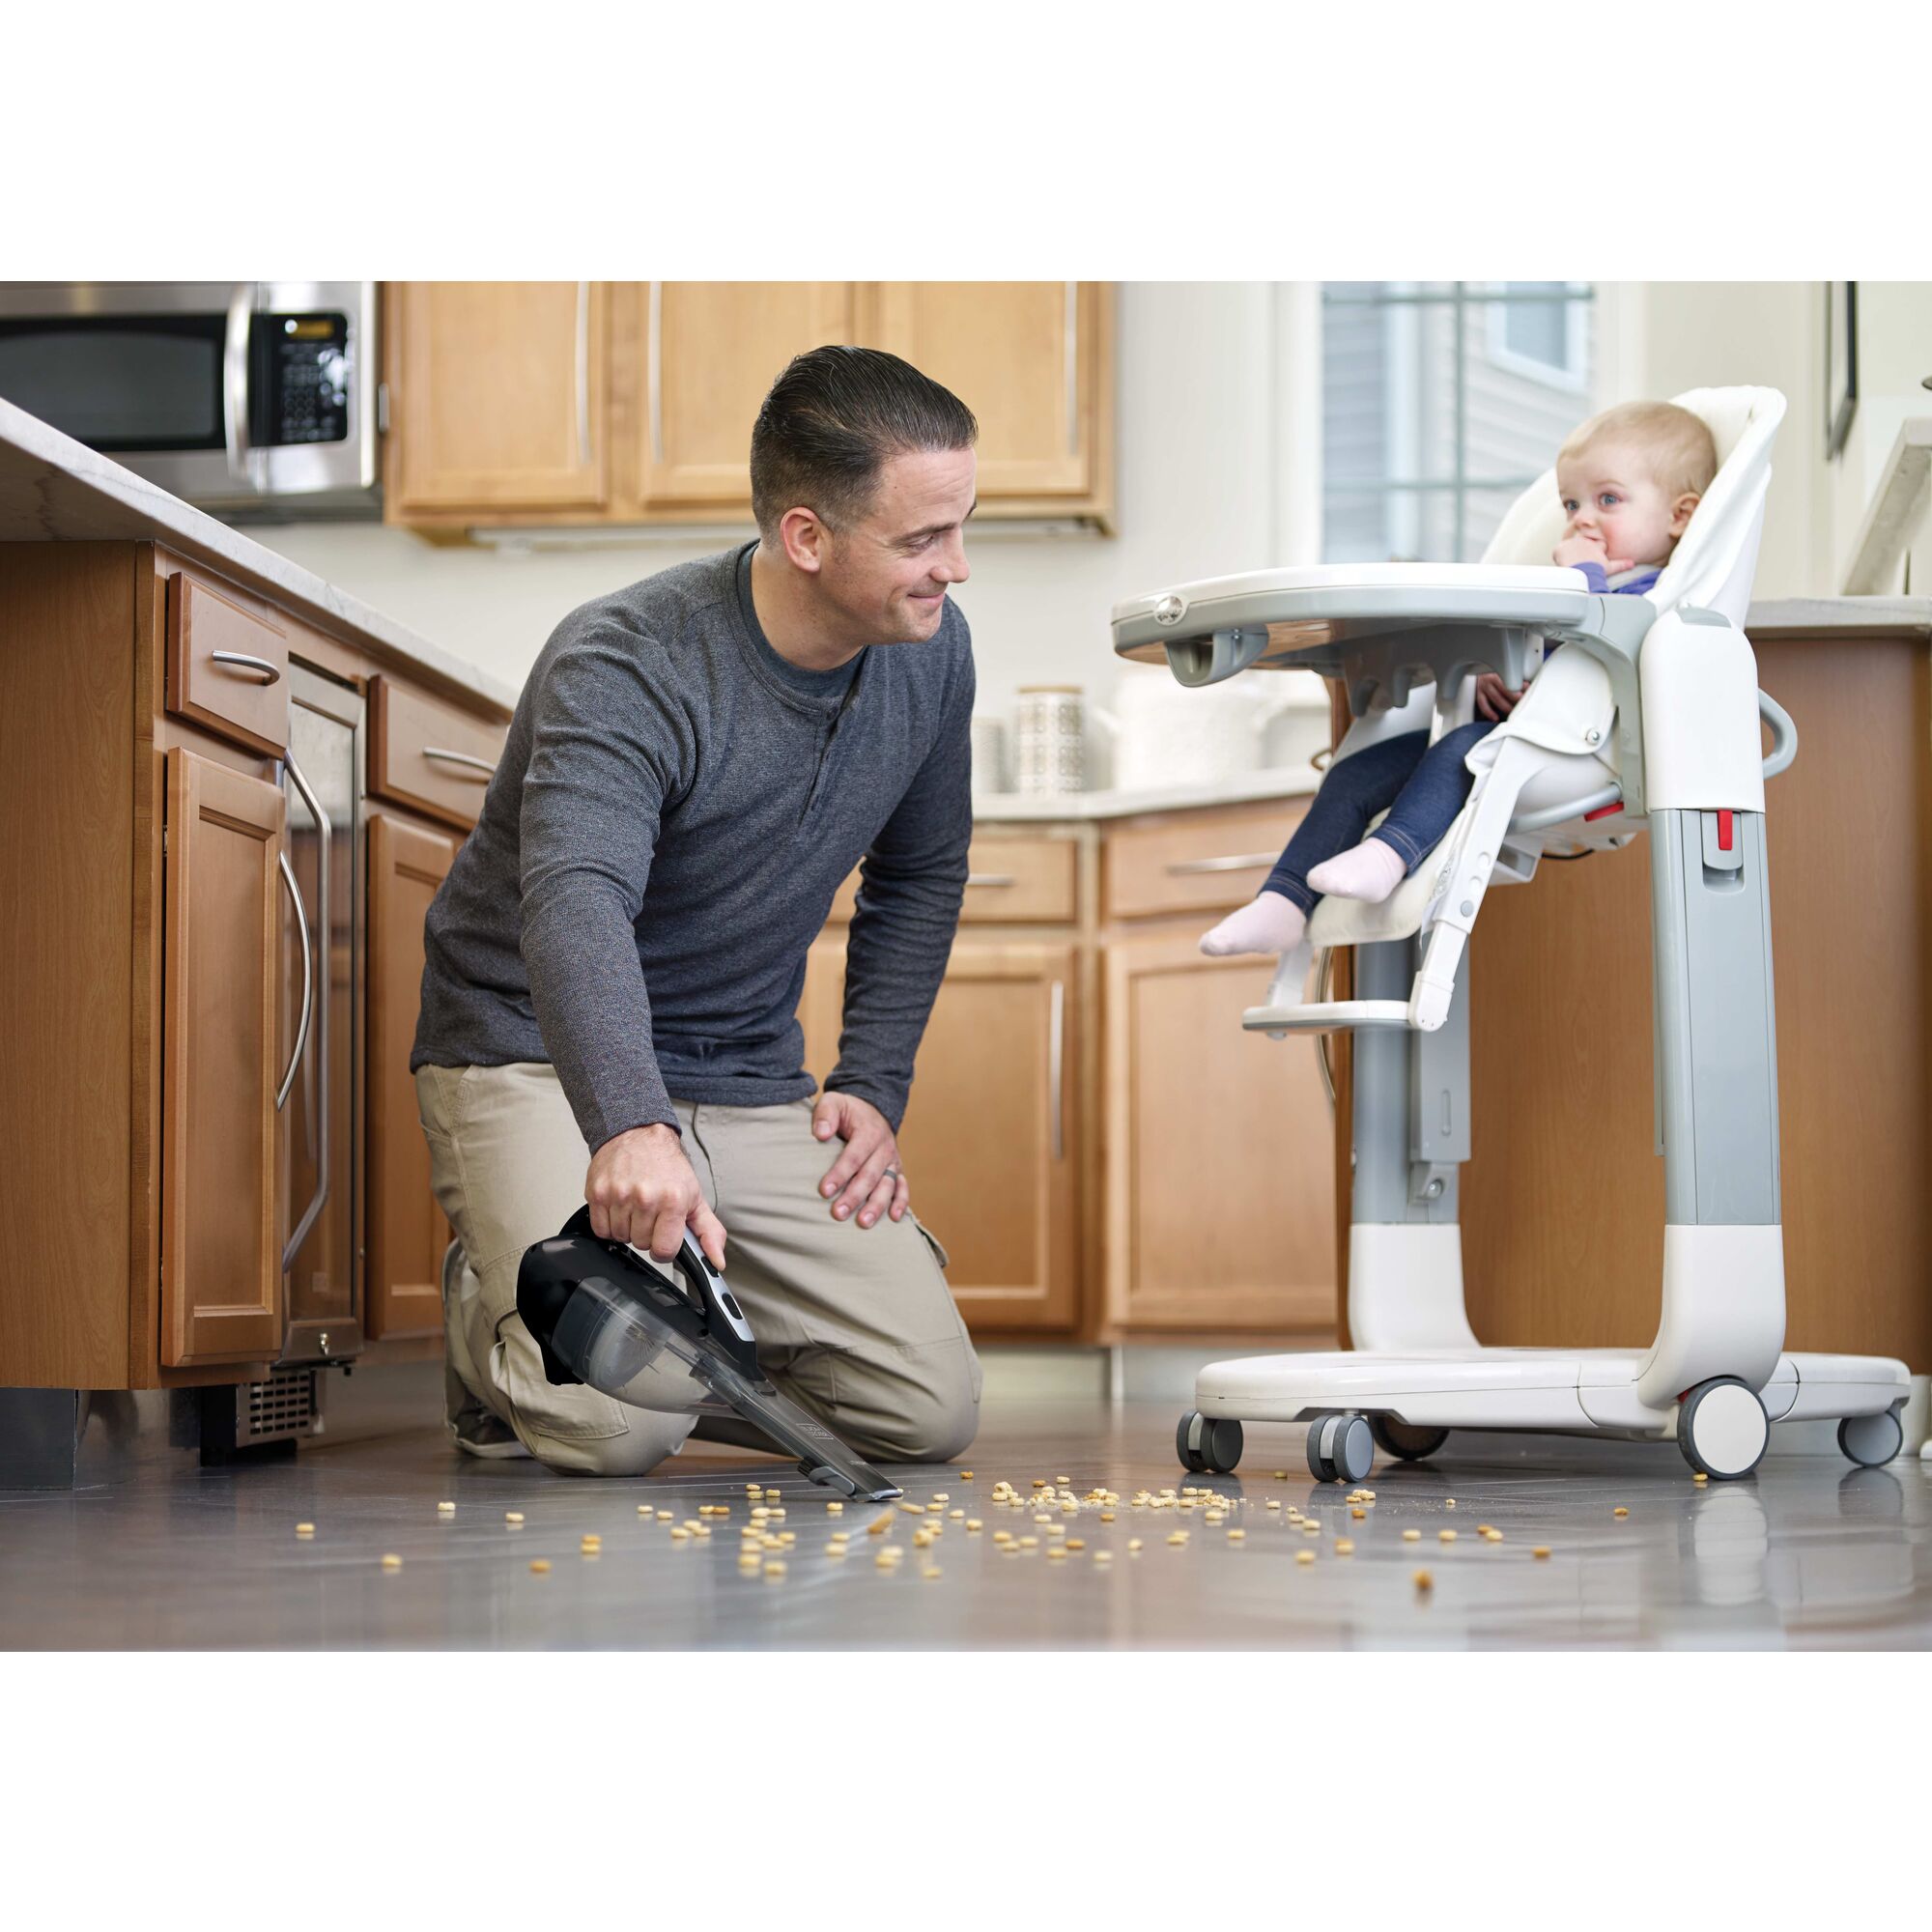 dustbuster AdvancedClean cordless hand vacuum being used by a person to clean food spillage.